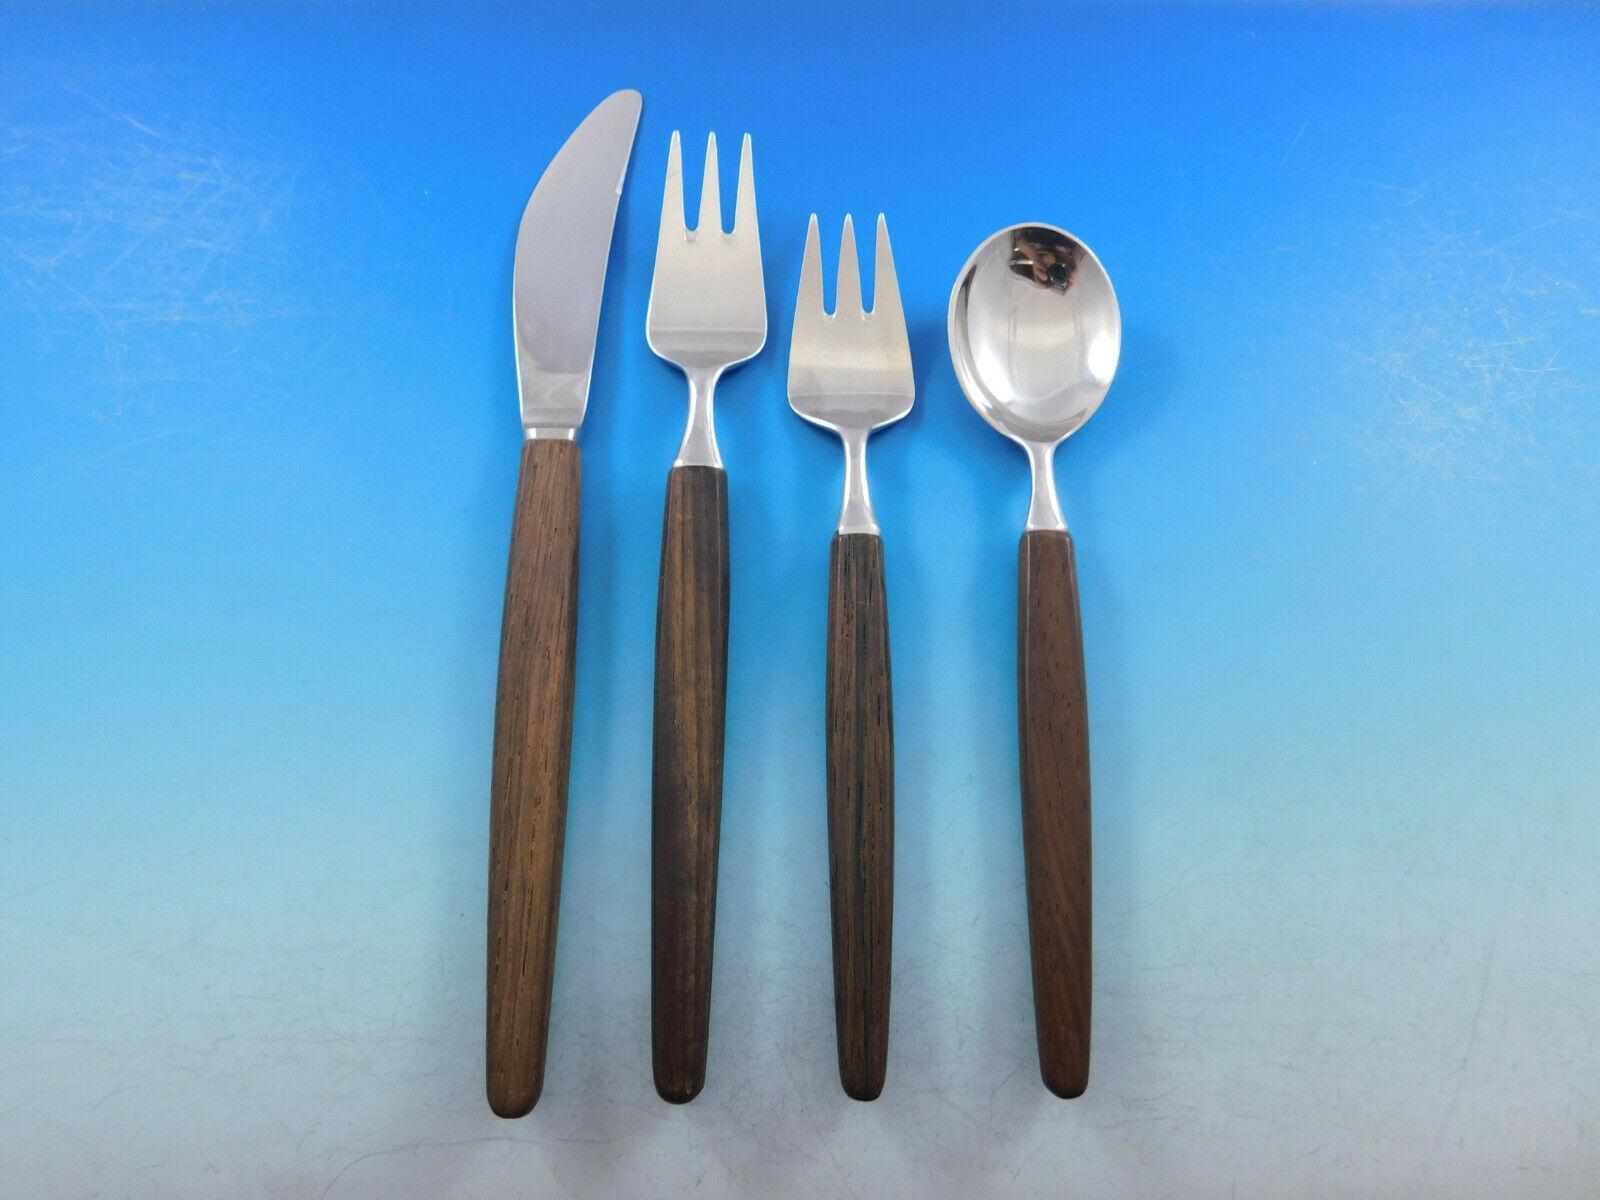 Mid-Century Modern Opus Rosewood Lundtofte Denmark Stainless Steel Flatware set, 50 pieces. This set includes:

10 Knives, 9